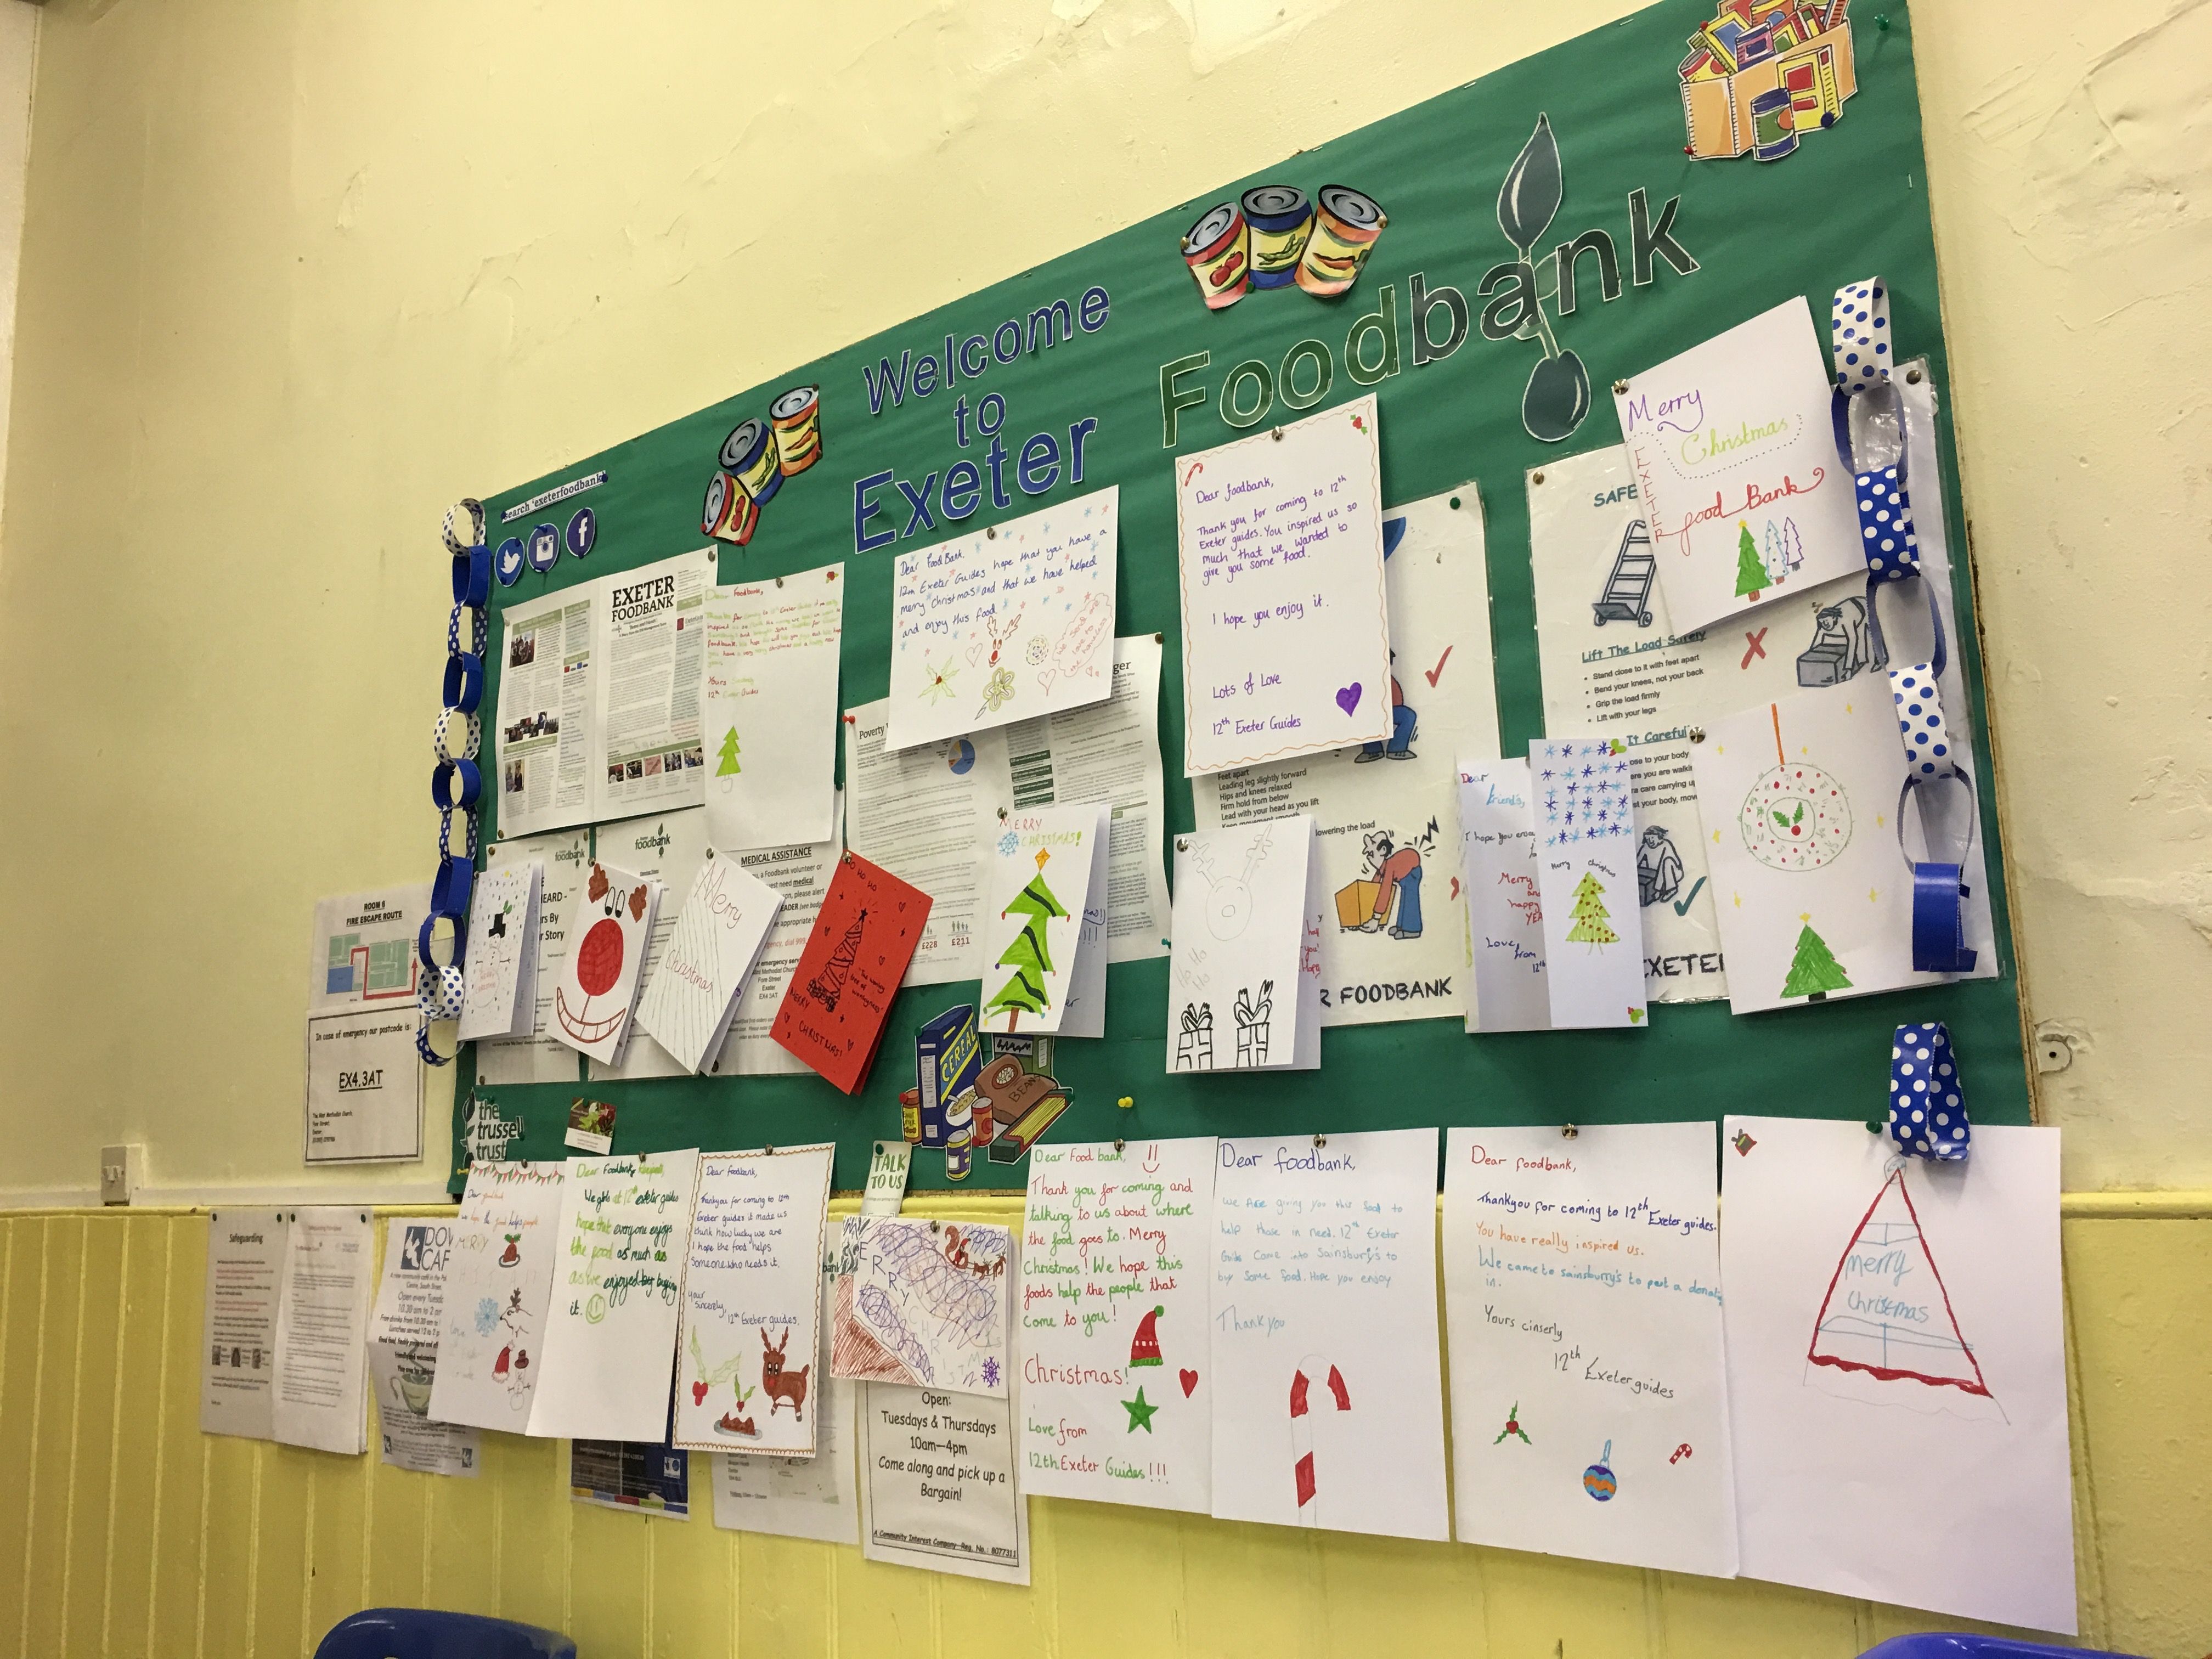 A recent talk by members of the Food Bank inspired Girl Guides to donate. The noticeboard is now covered with posters for support agencies and letters from the Girl Guides. Image by Caitlin Bawn. England, 2016.